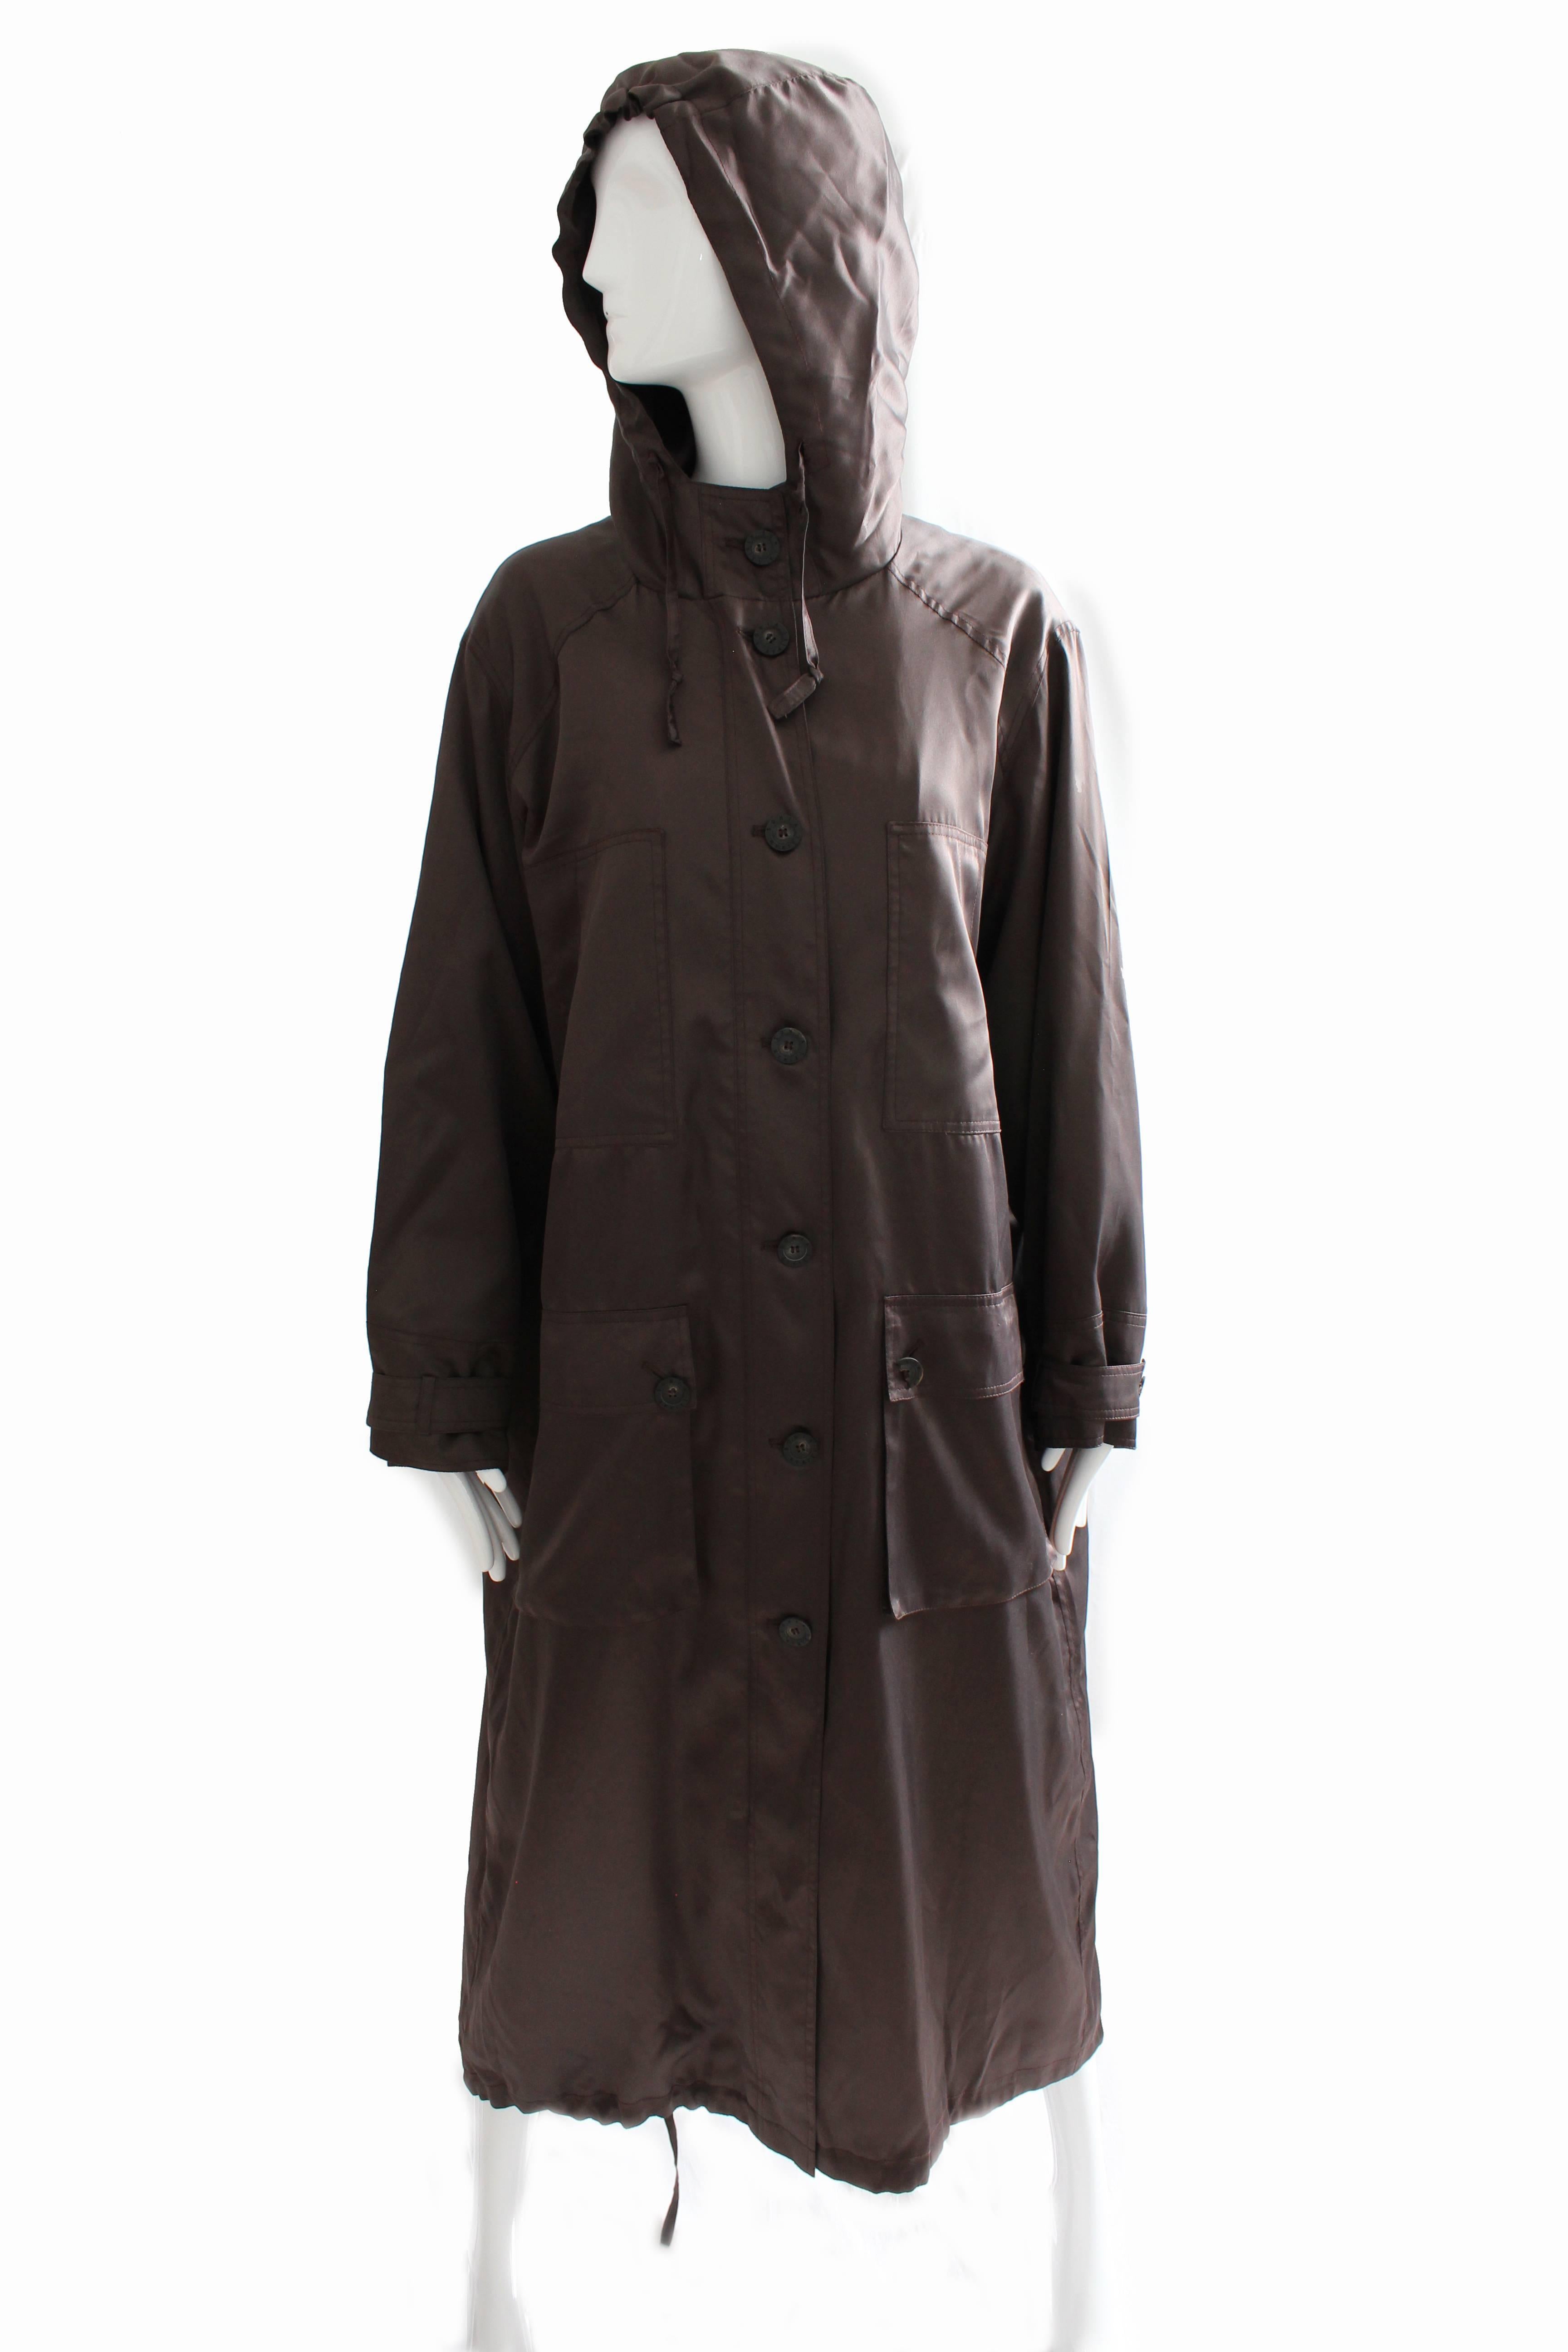 This chic trench coat was made by Sonia Rykiel, most likely in the early 1990s.  Made from a deep brown satin, it features an attached hood, zippered front with button overlay, and large button square pockets at each hip.  The bottom hem features a